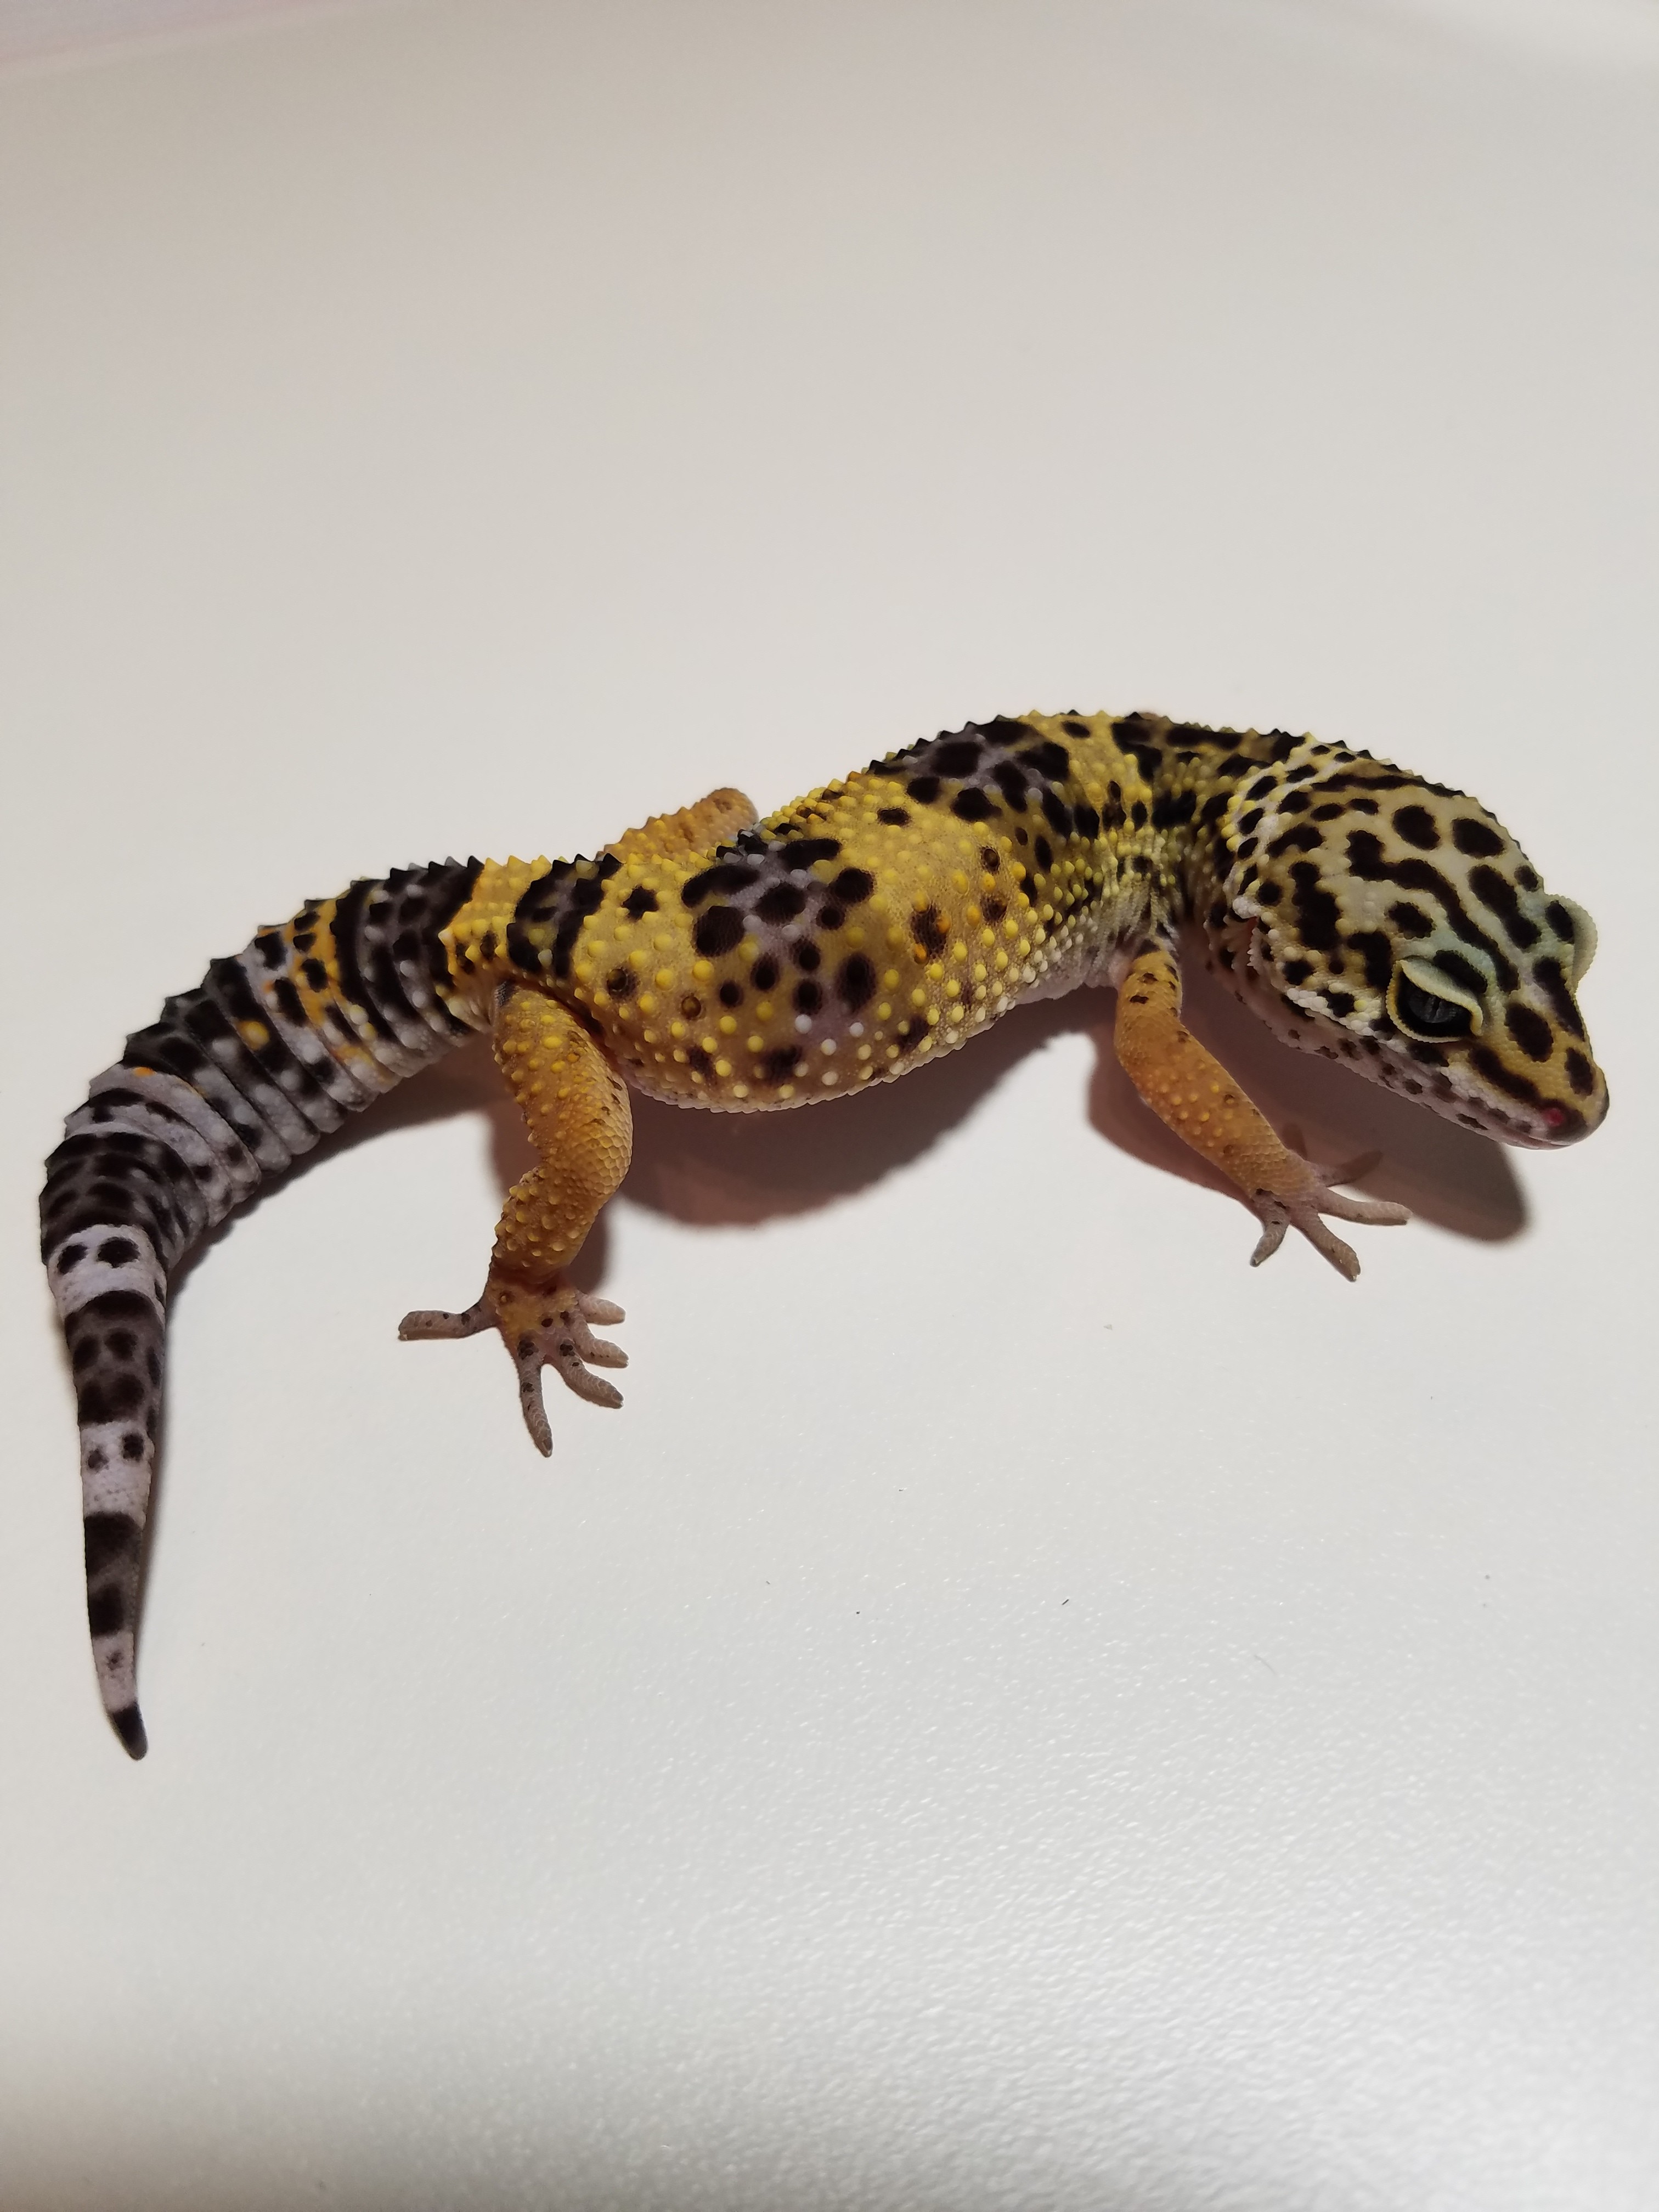 Normal Leopard Gecko by Morph Addicts